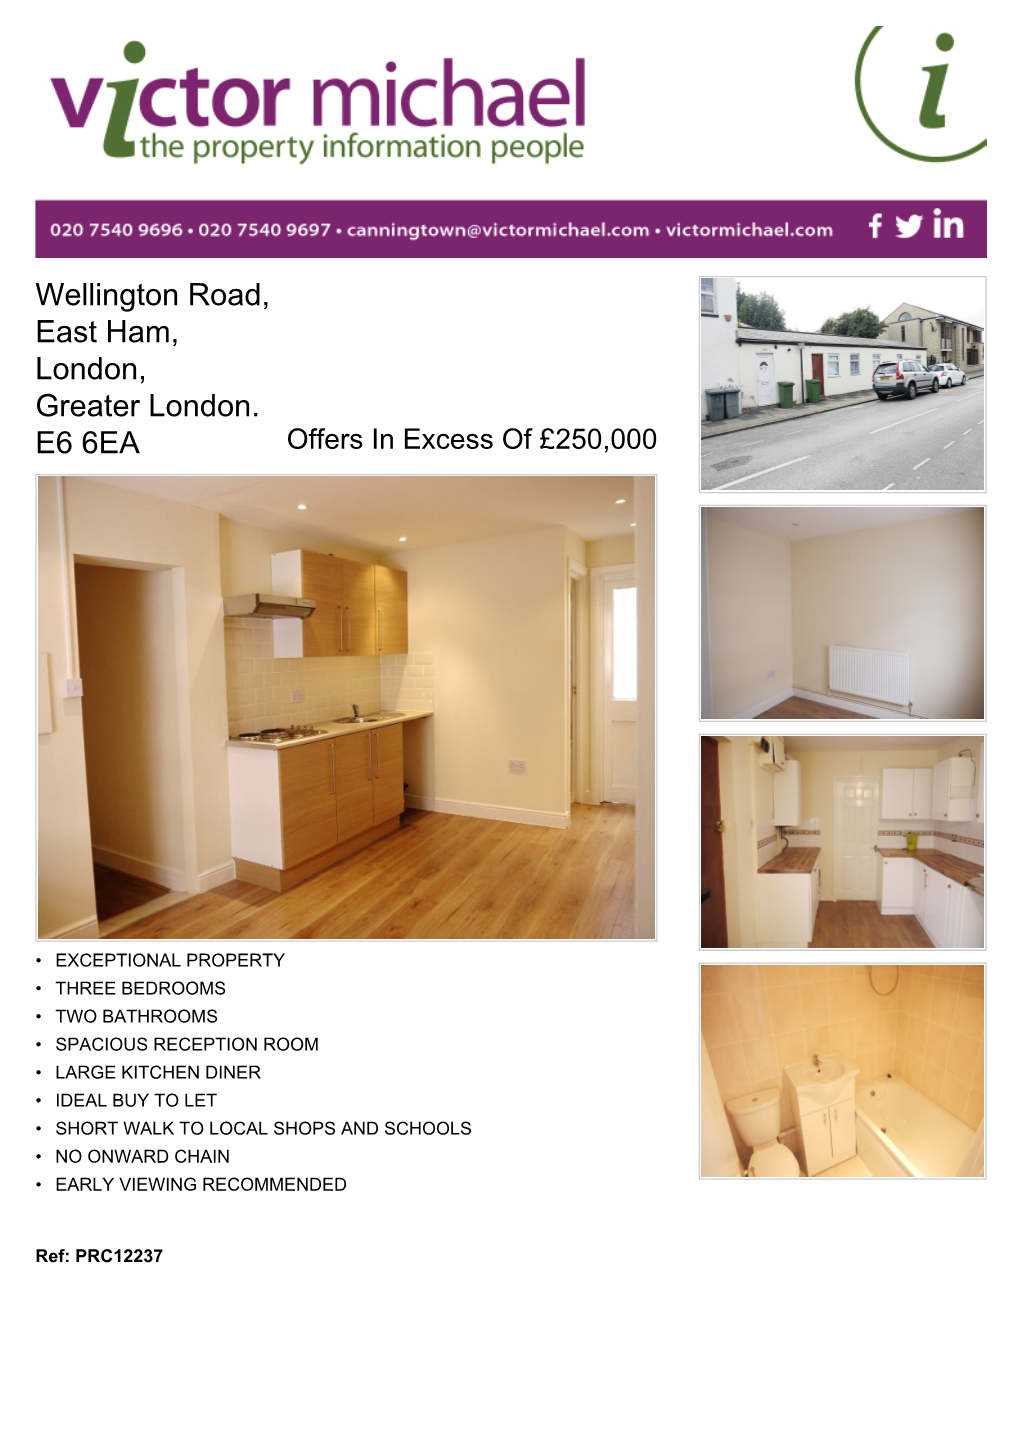 Wellington Road, East Ham, London, Greater London. E6 6EA Offers in Excess of £250,000